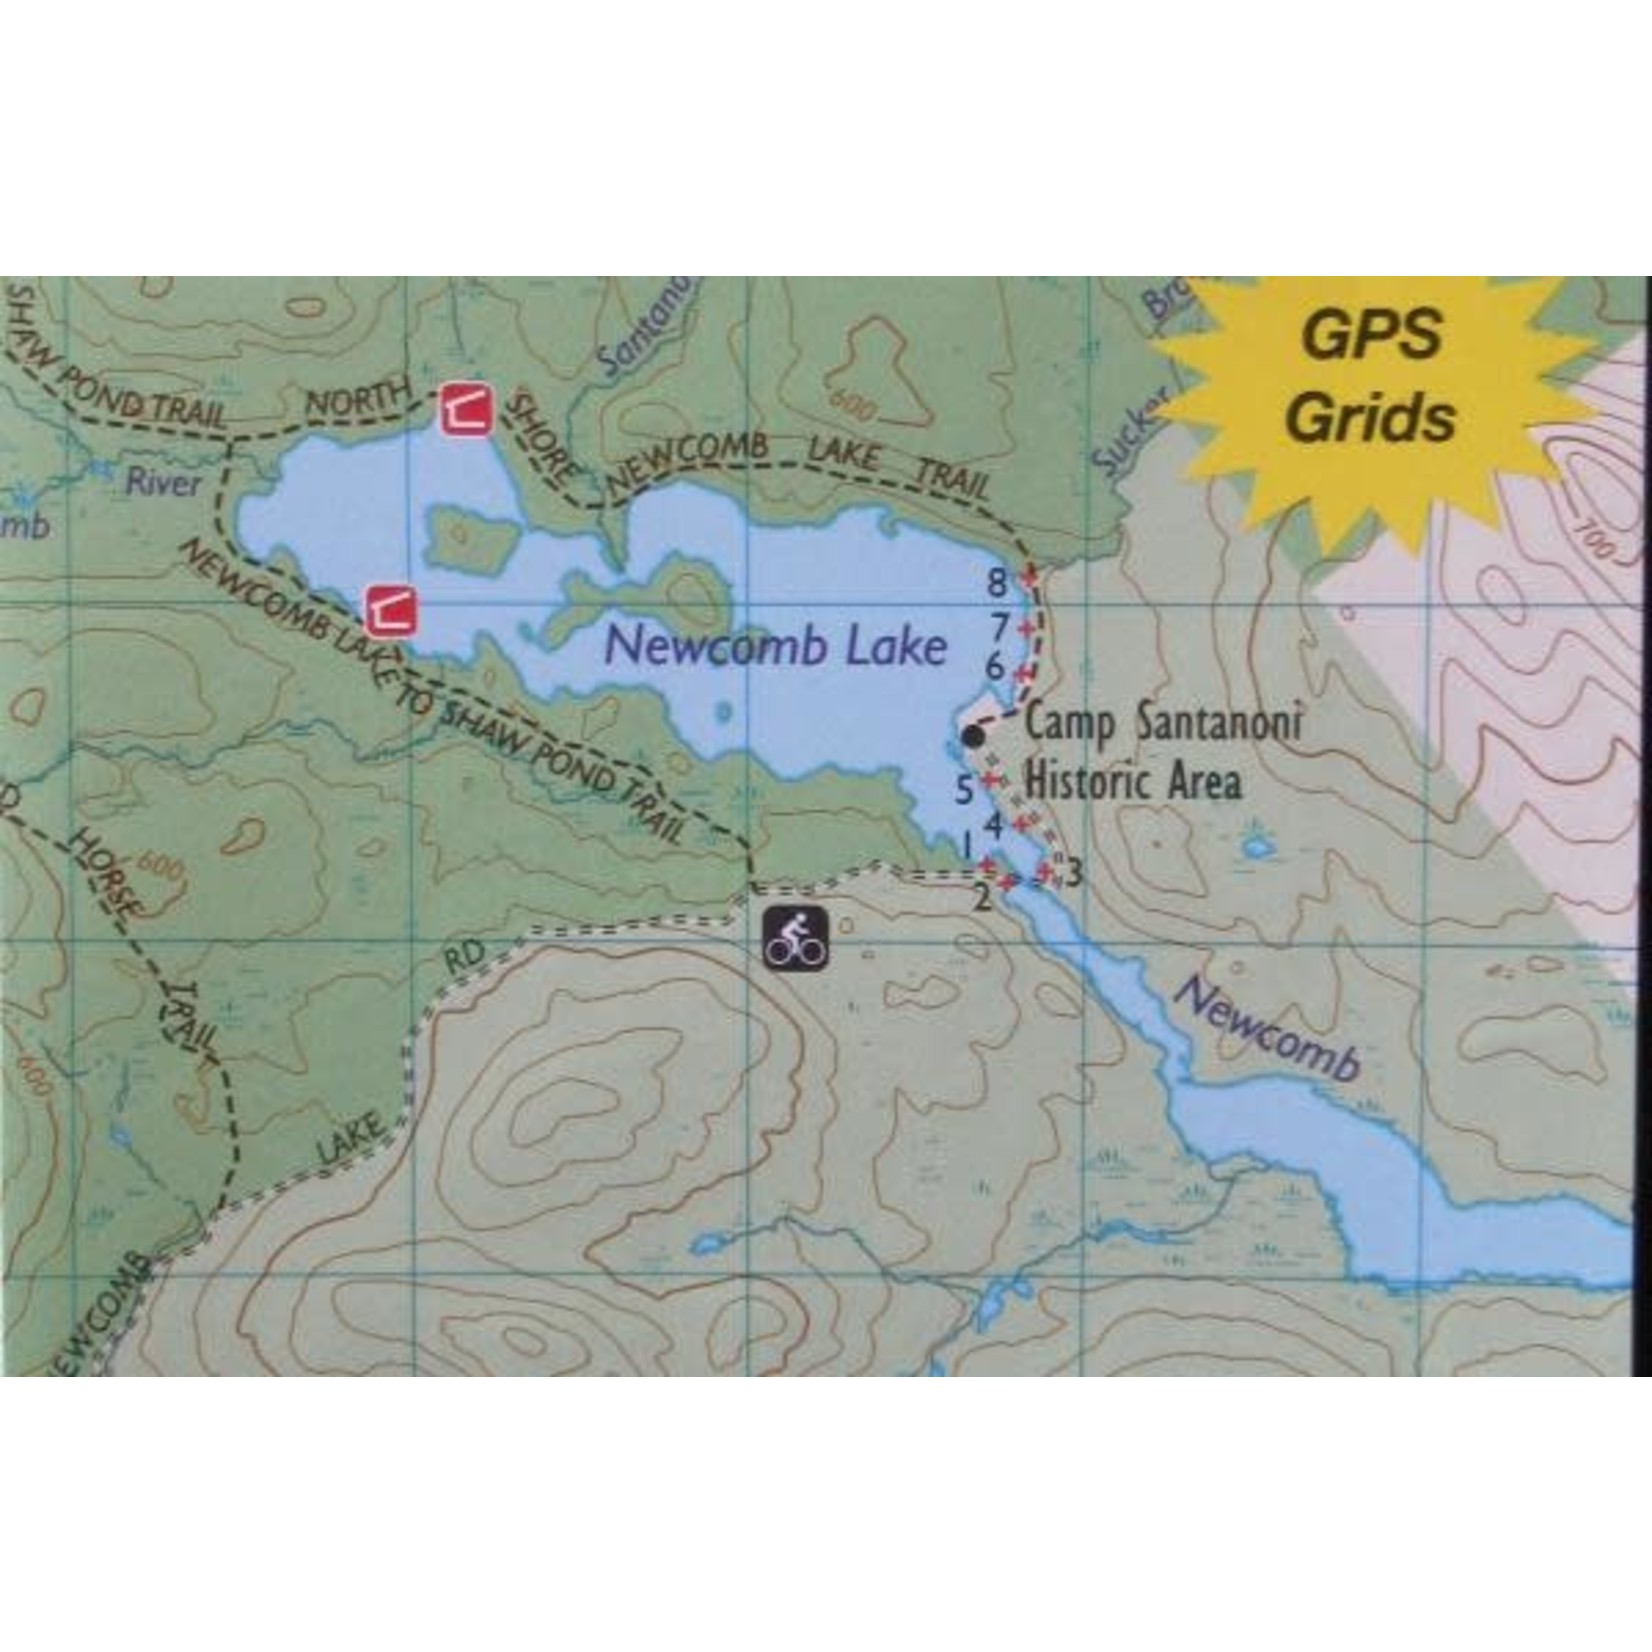 ADK PADDLERS MAP NEWCOMB